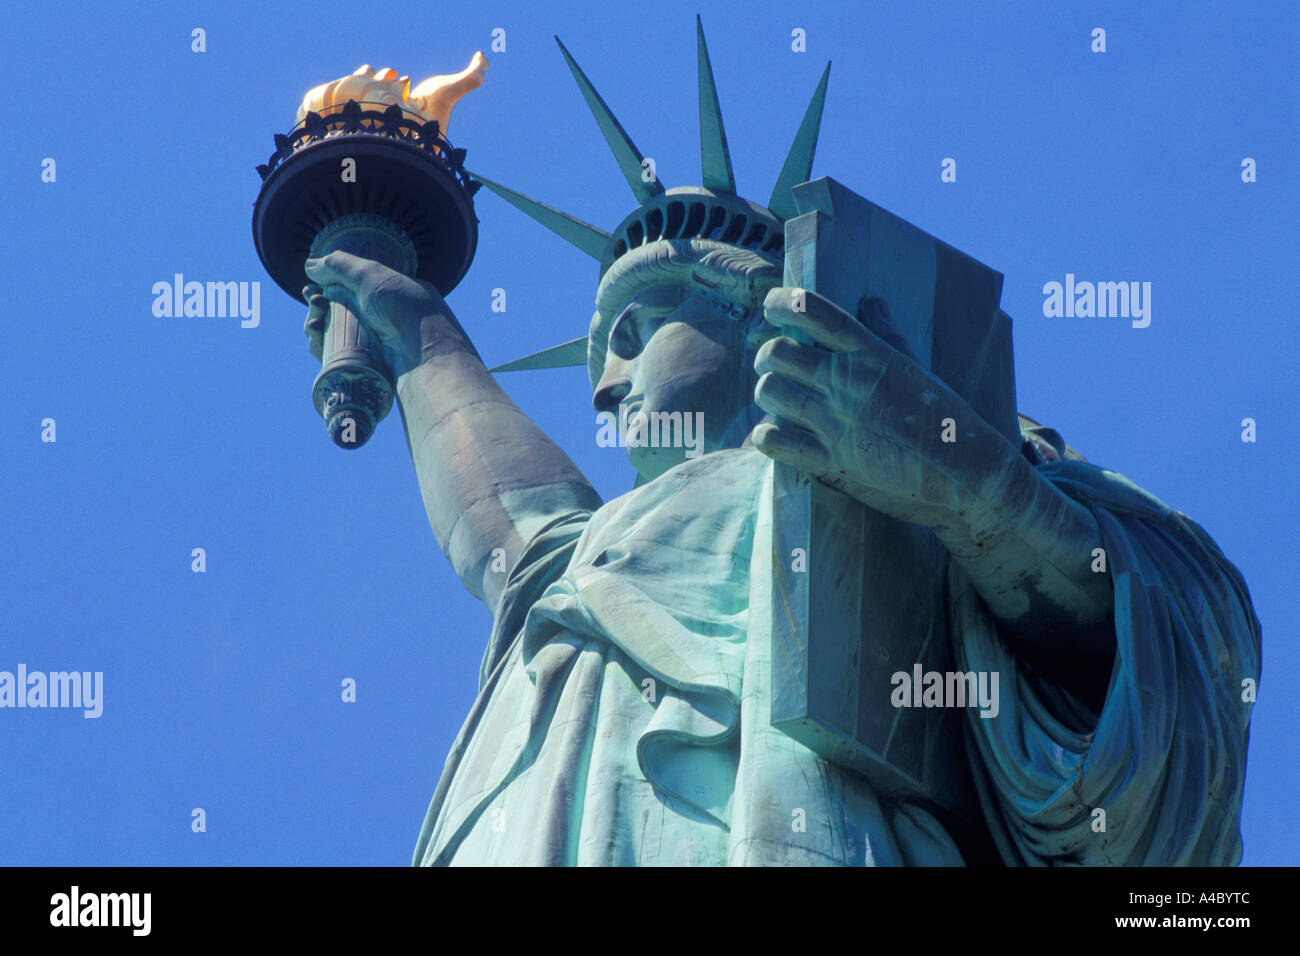 Statue of Liberty New York close up. Low angle view of upper body, head, torch, flame, tablet, crown. Historic monument in Lower Manhattan, USA Stock Photo